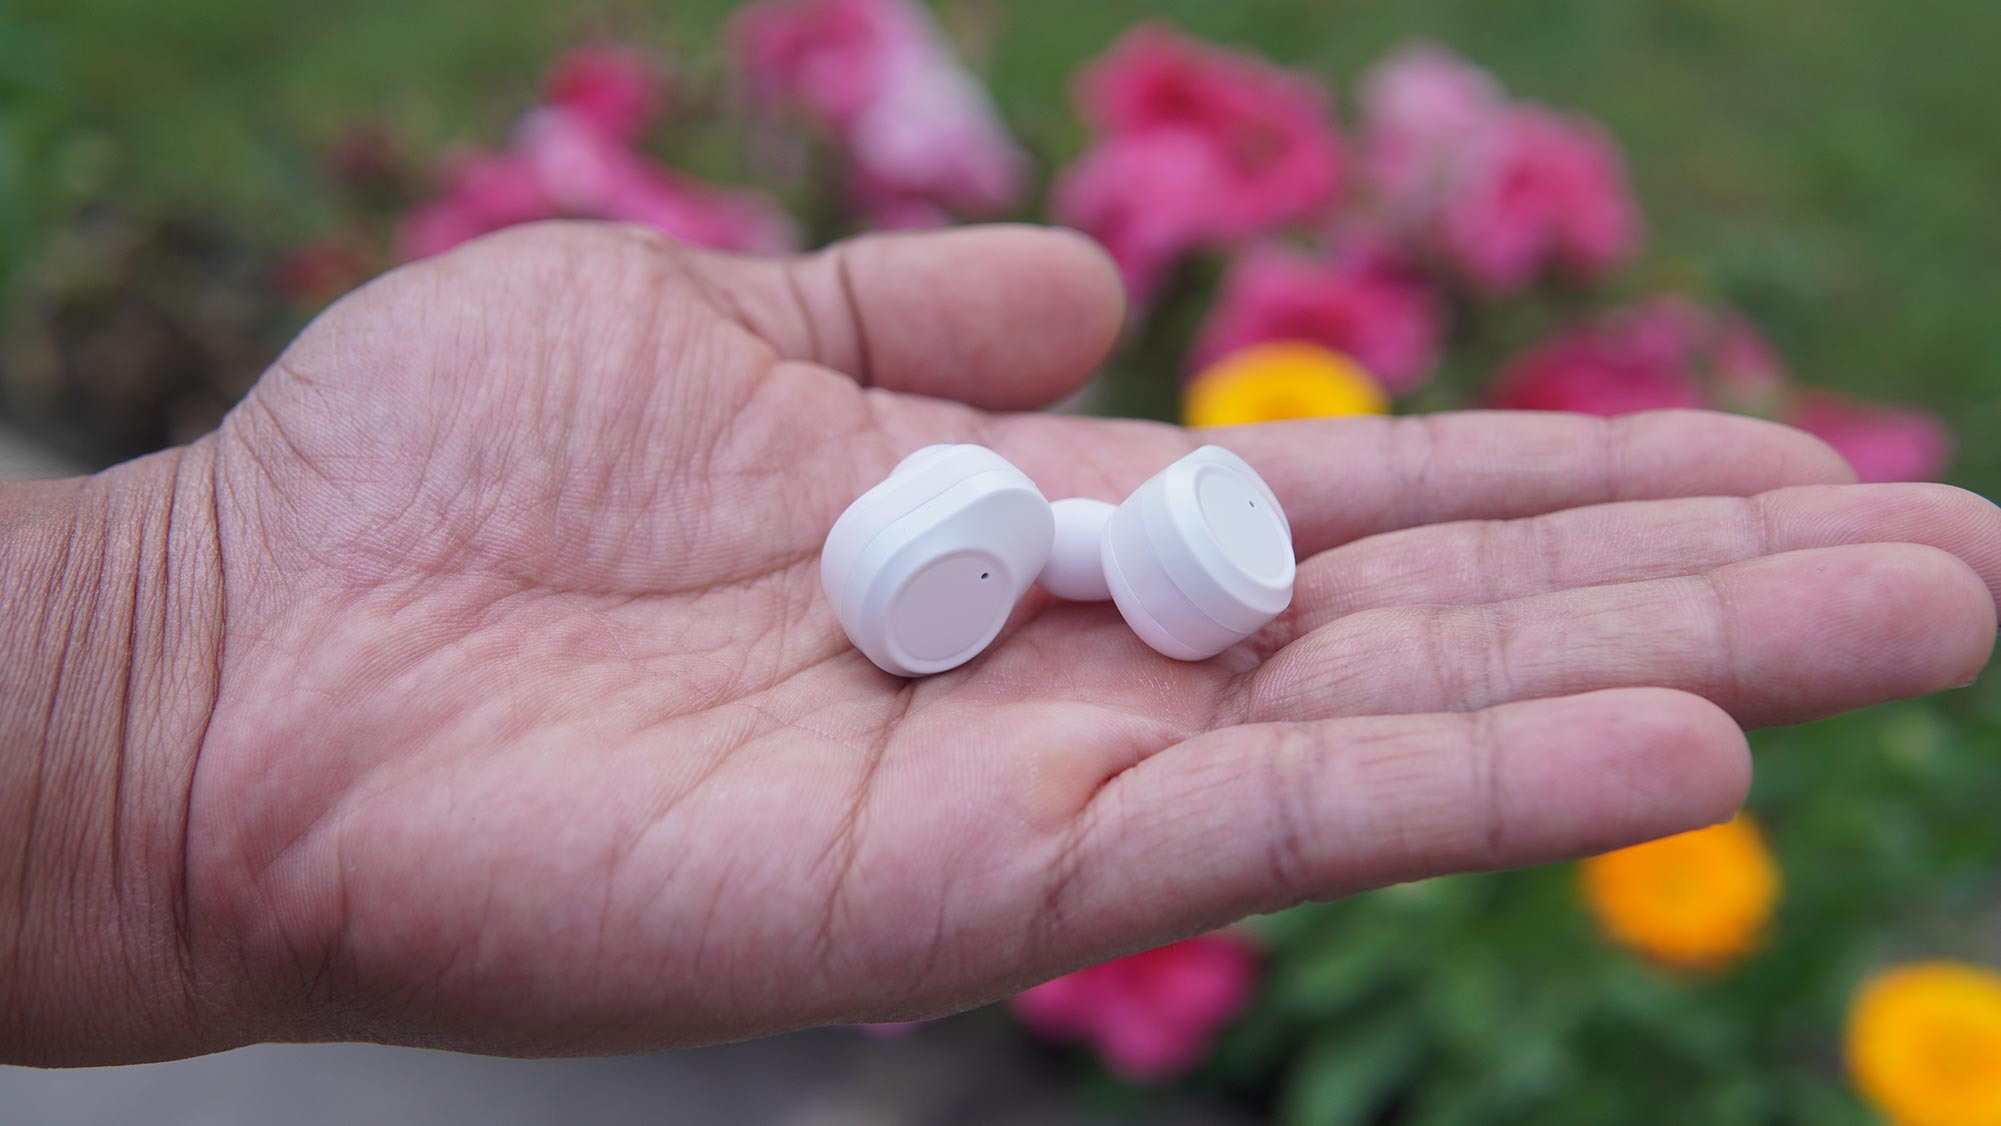 Coolpad Coolbuds Pro Earbuds